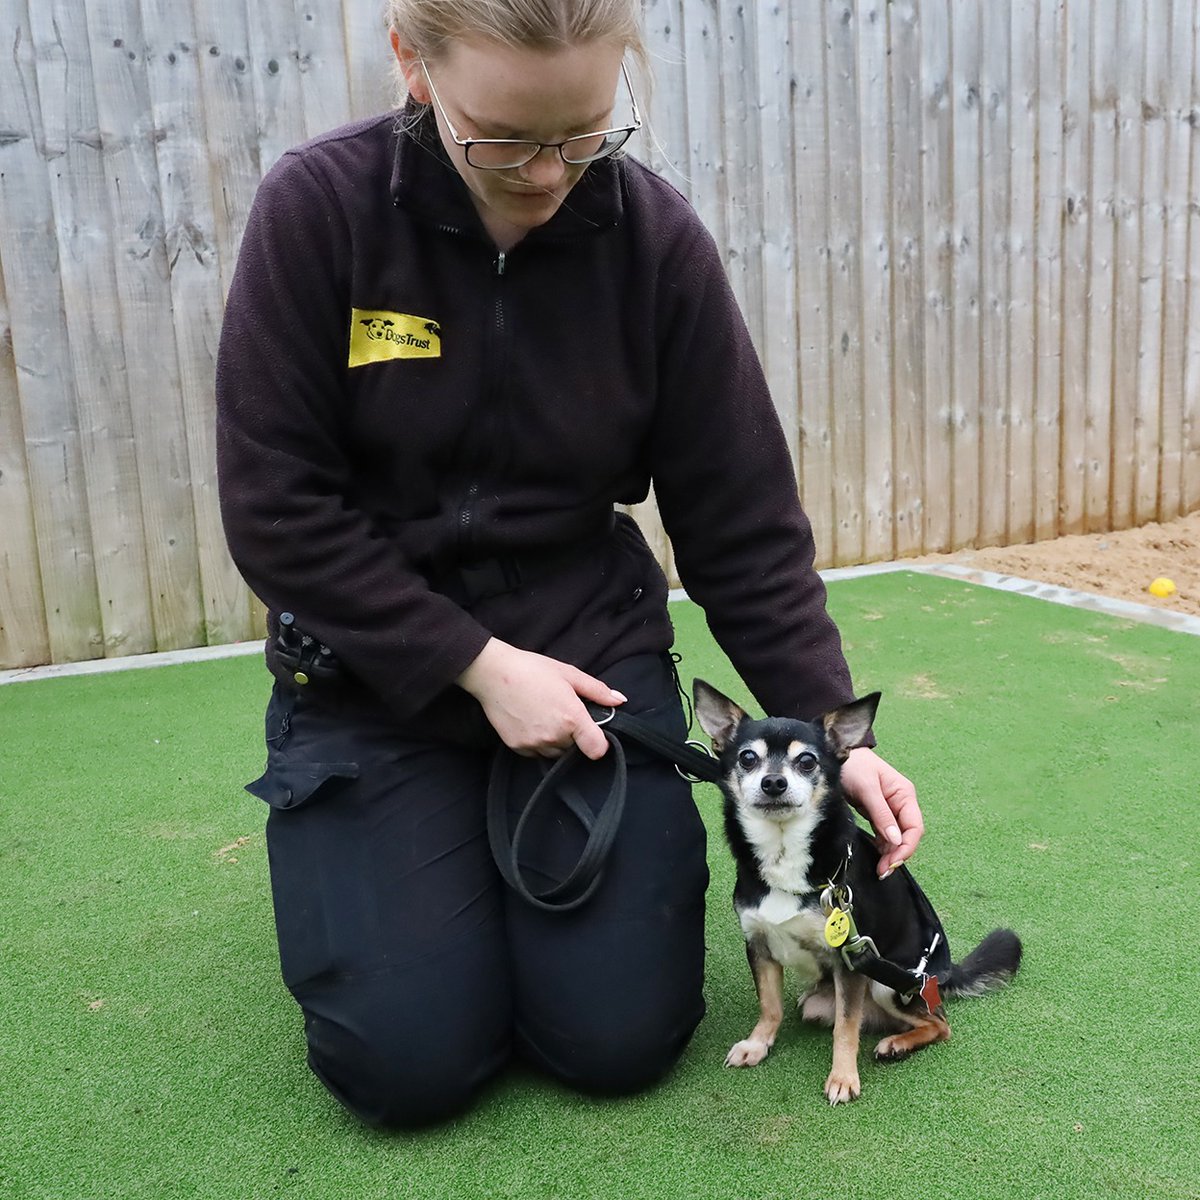 💛 MEET MICKEY 💛 This adorable #Chihuahua is 11yrs old and he's been looking for his forever home for a few weeks now. 😔 Find out more👉 bit.ly/3PW8k3C #ChihuahuaOfTheDay #RescueDog #OldAgedPooch #Leeds #DogOfTheDay #AdoptDontShop #AdoptADog @DogsTrust